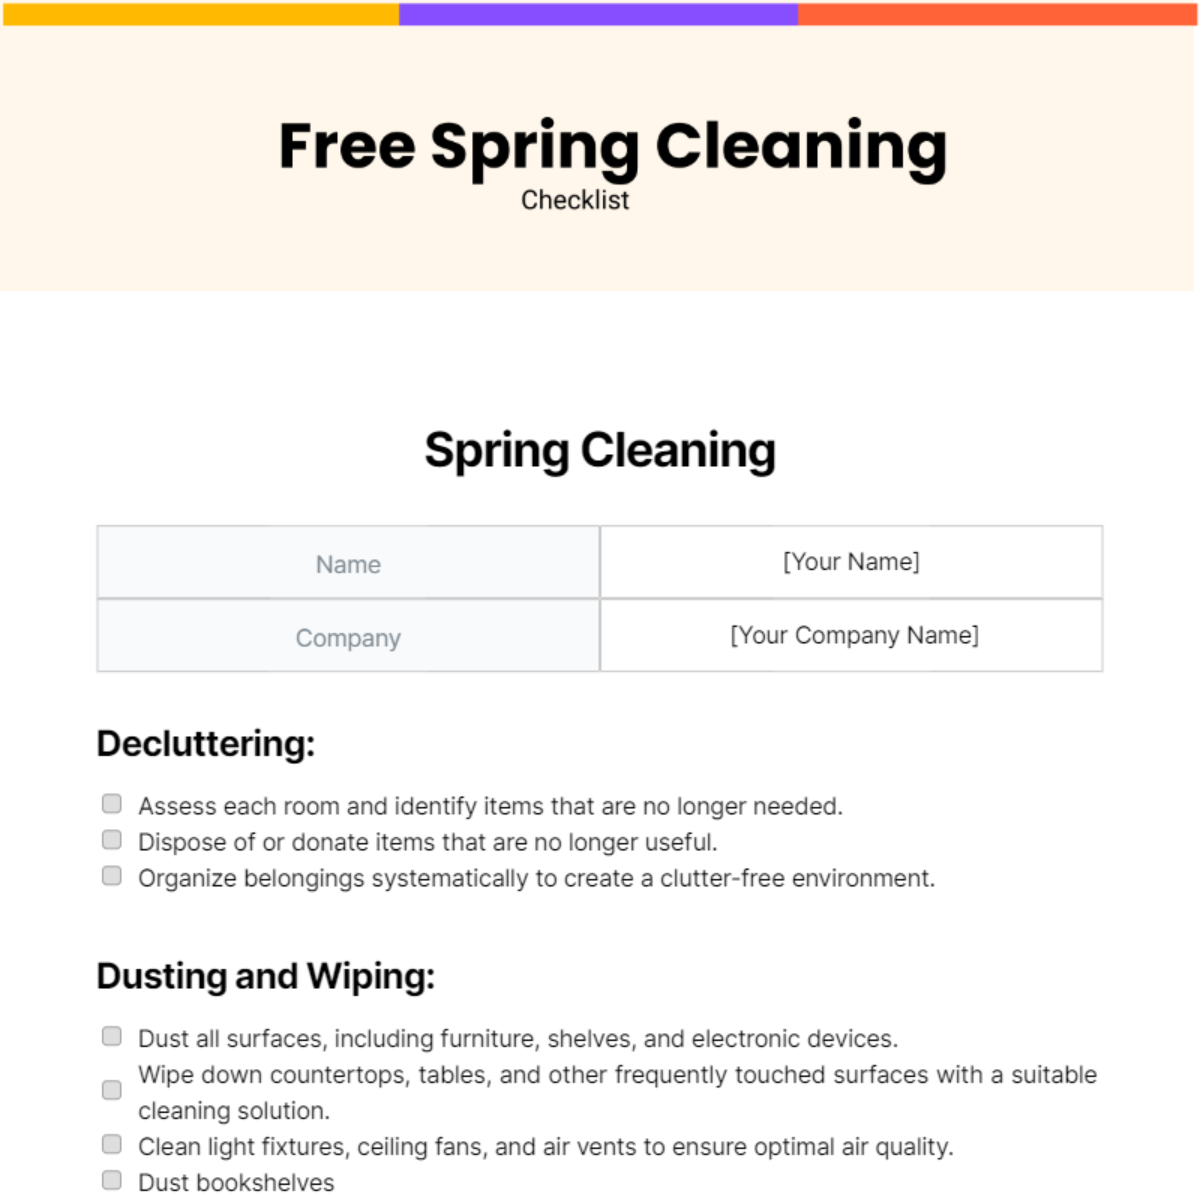 Free Spring Cleaning Checklist Template